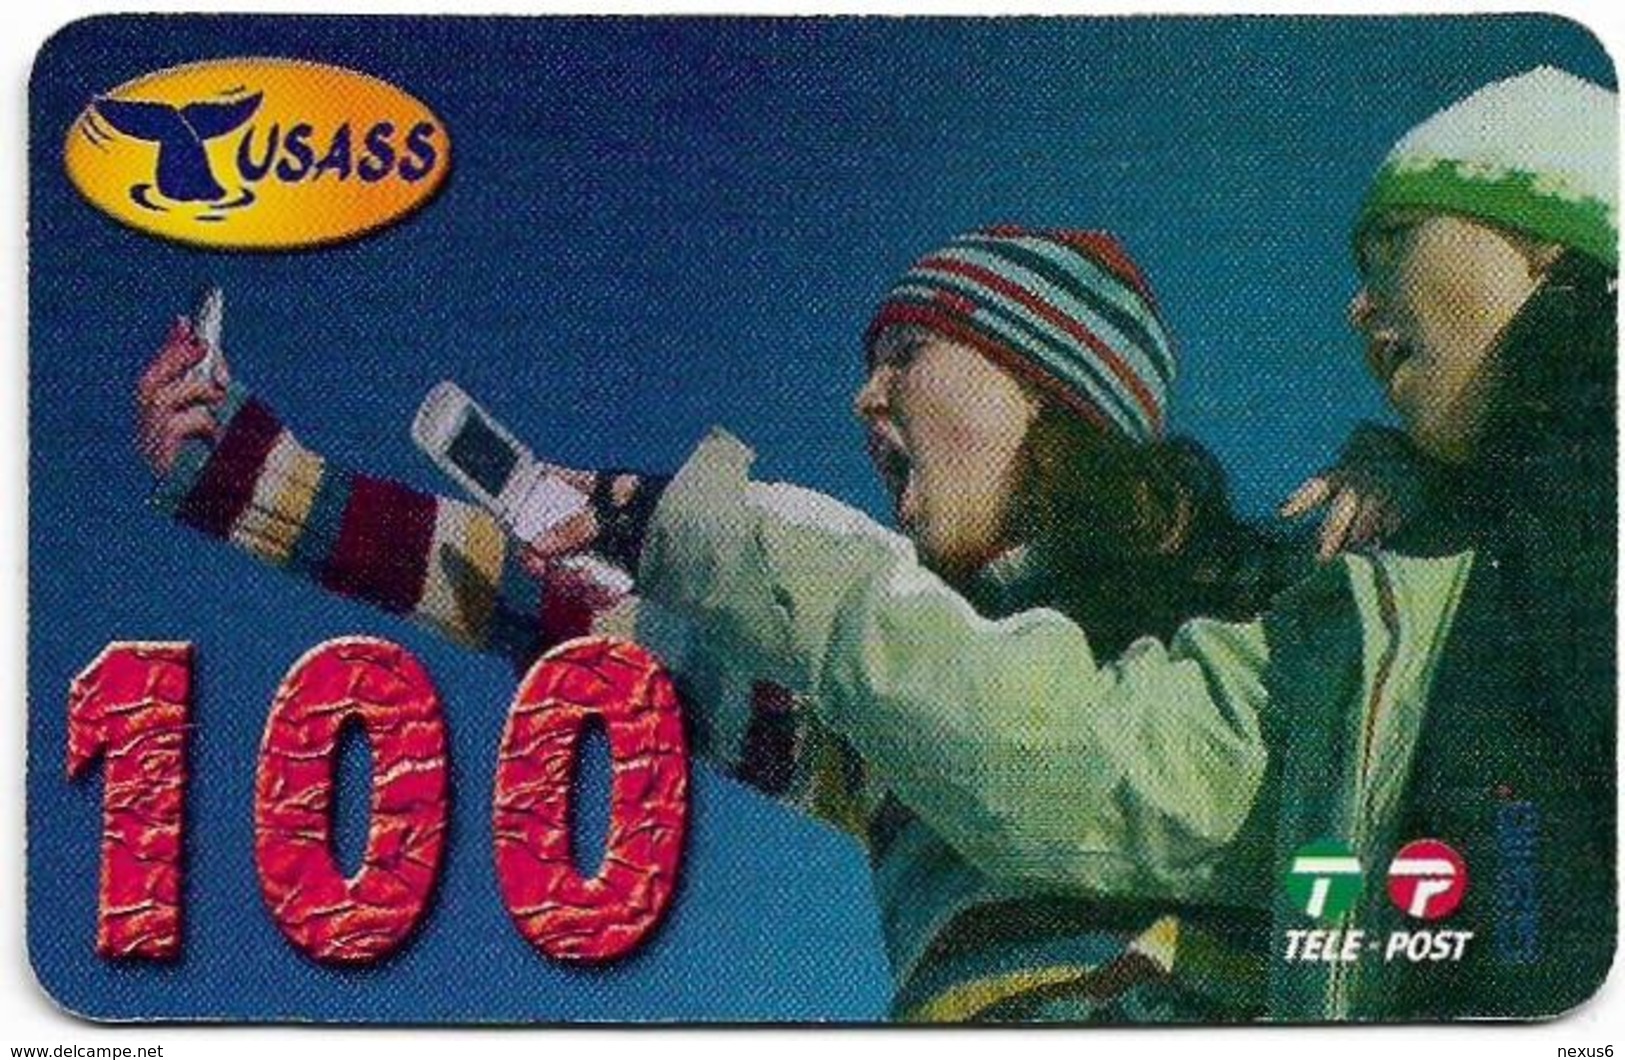 Greenland - Tusass - Two Girls With Mobile, GSM Refill, 100kr. Exp. 04.01.2007, Used - Groenlandia